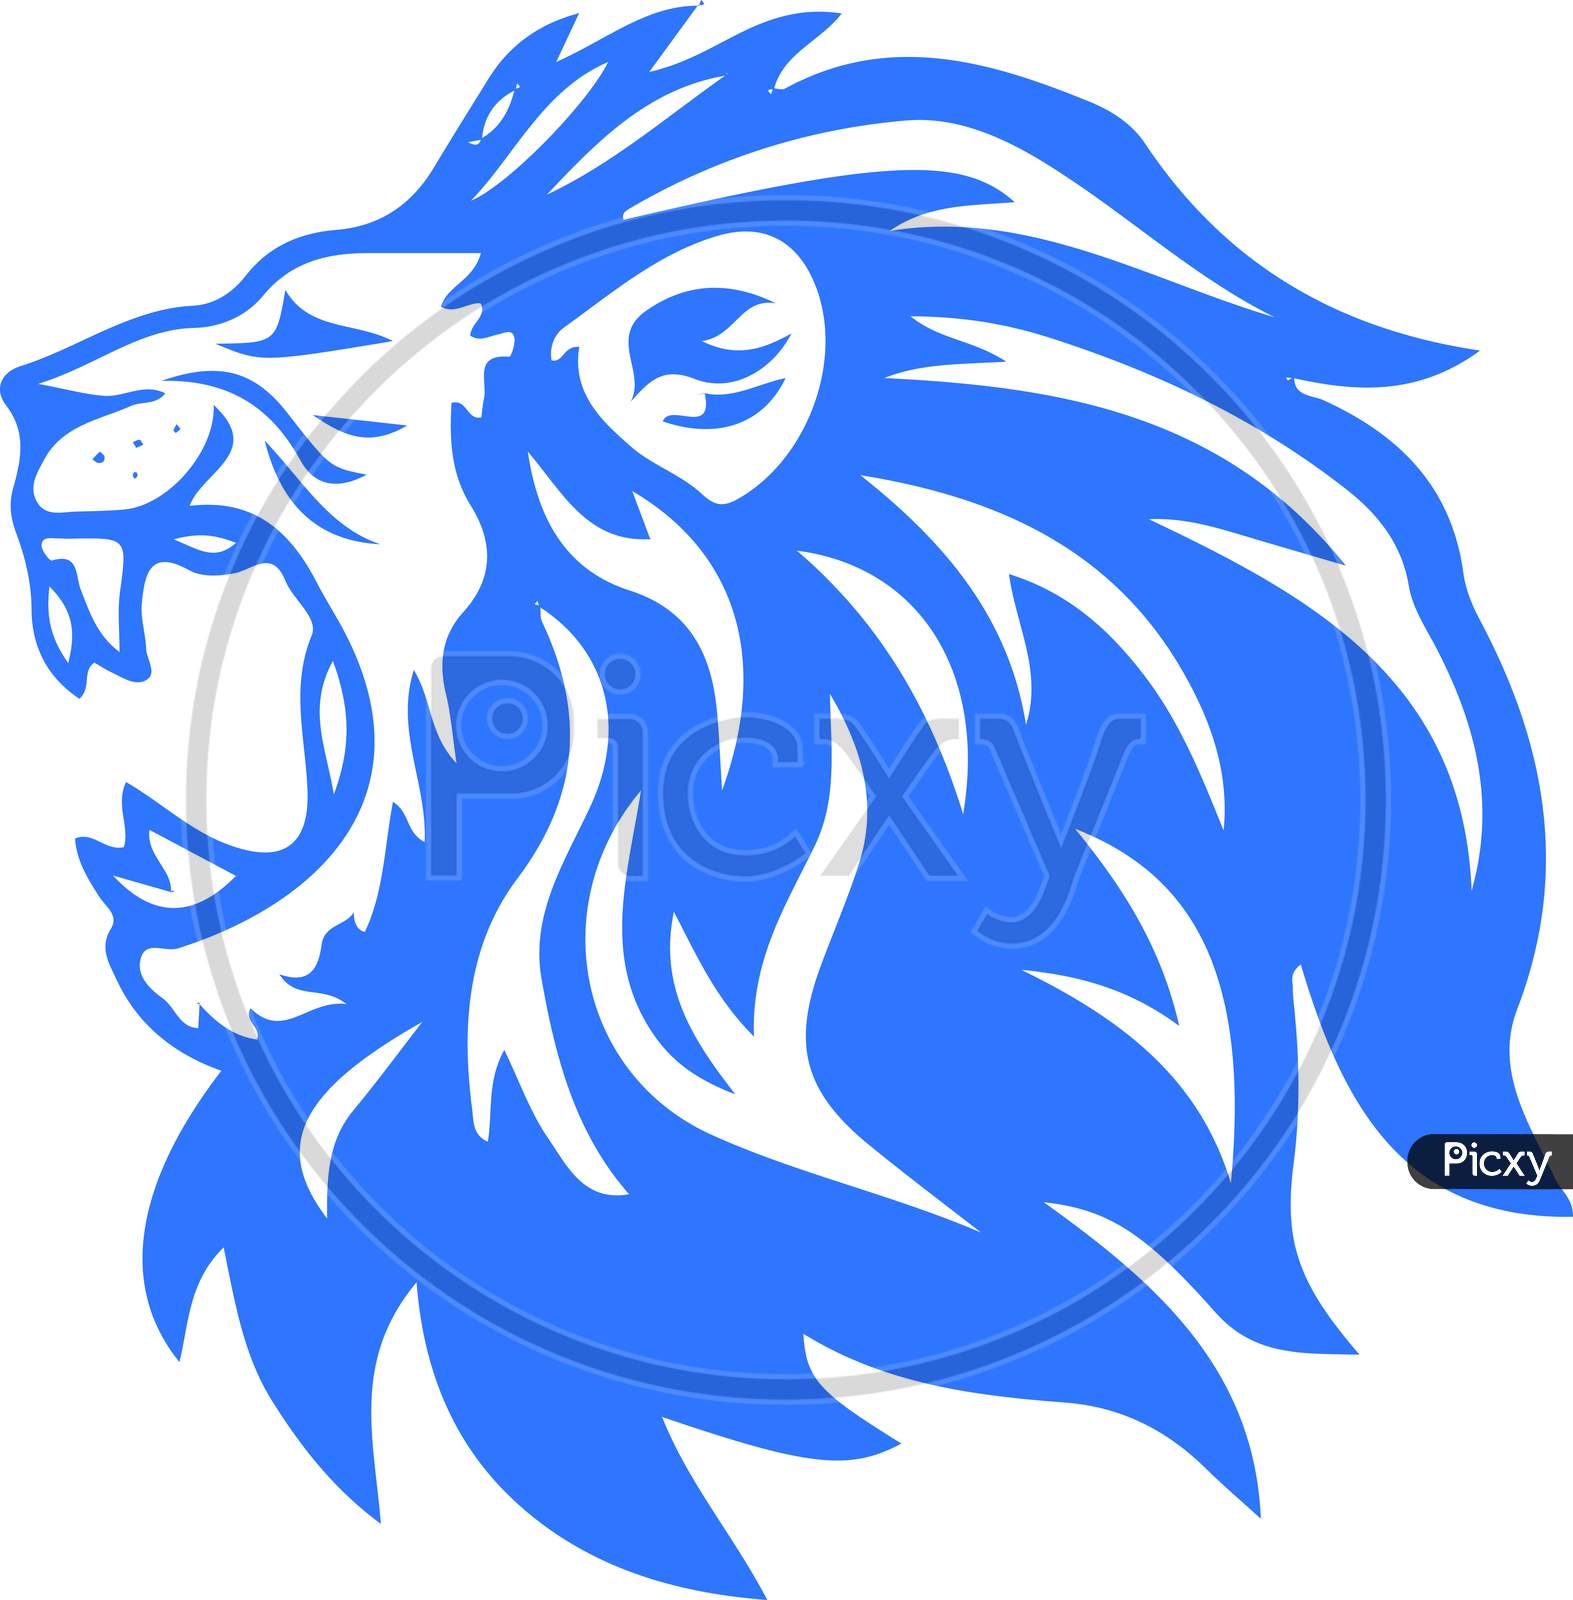 5900 Lion Outline Stock Photos Pictures  RoyaltyFree Images  iStock   Lion head